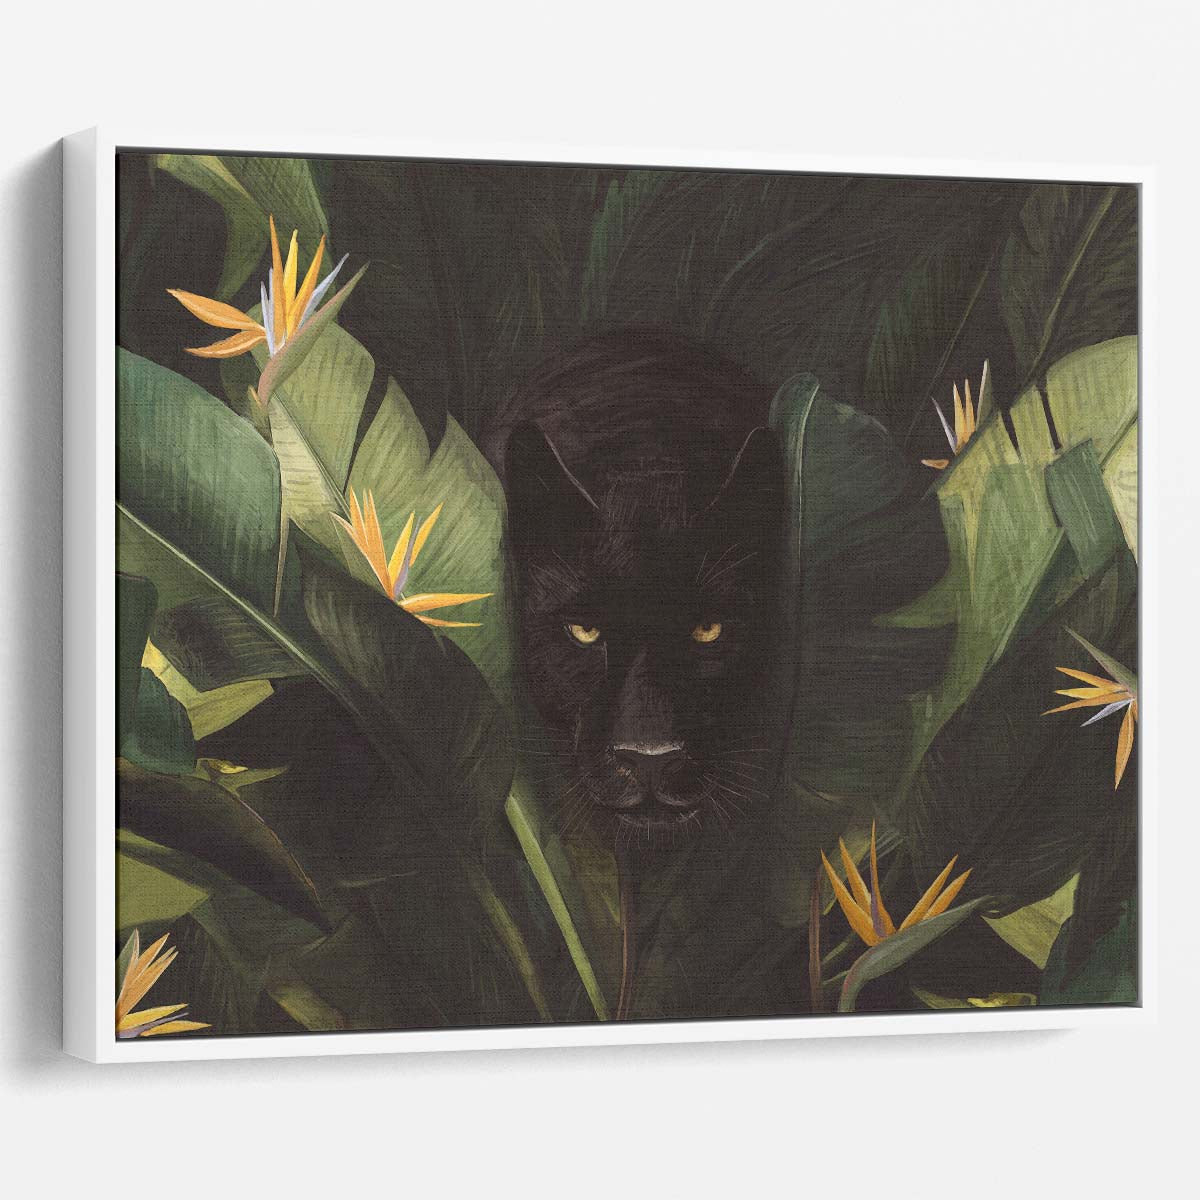 Black Panther Close-Up Painting by Florent Bodart Wall Art